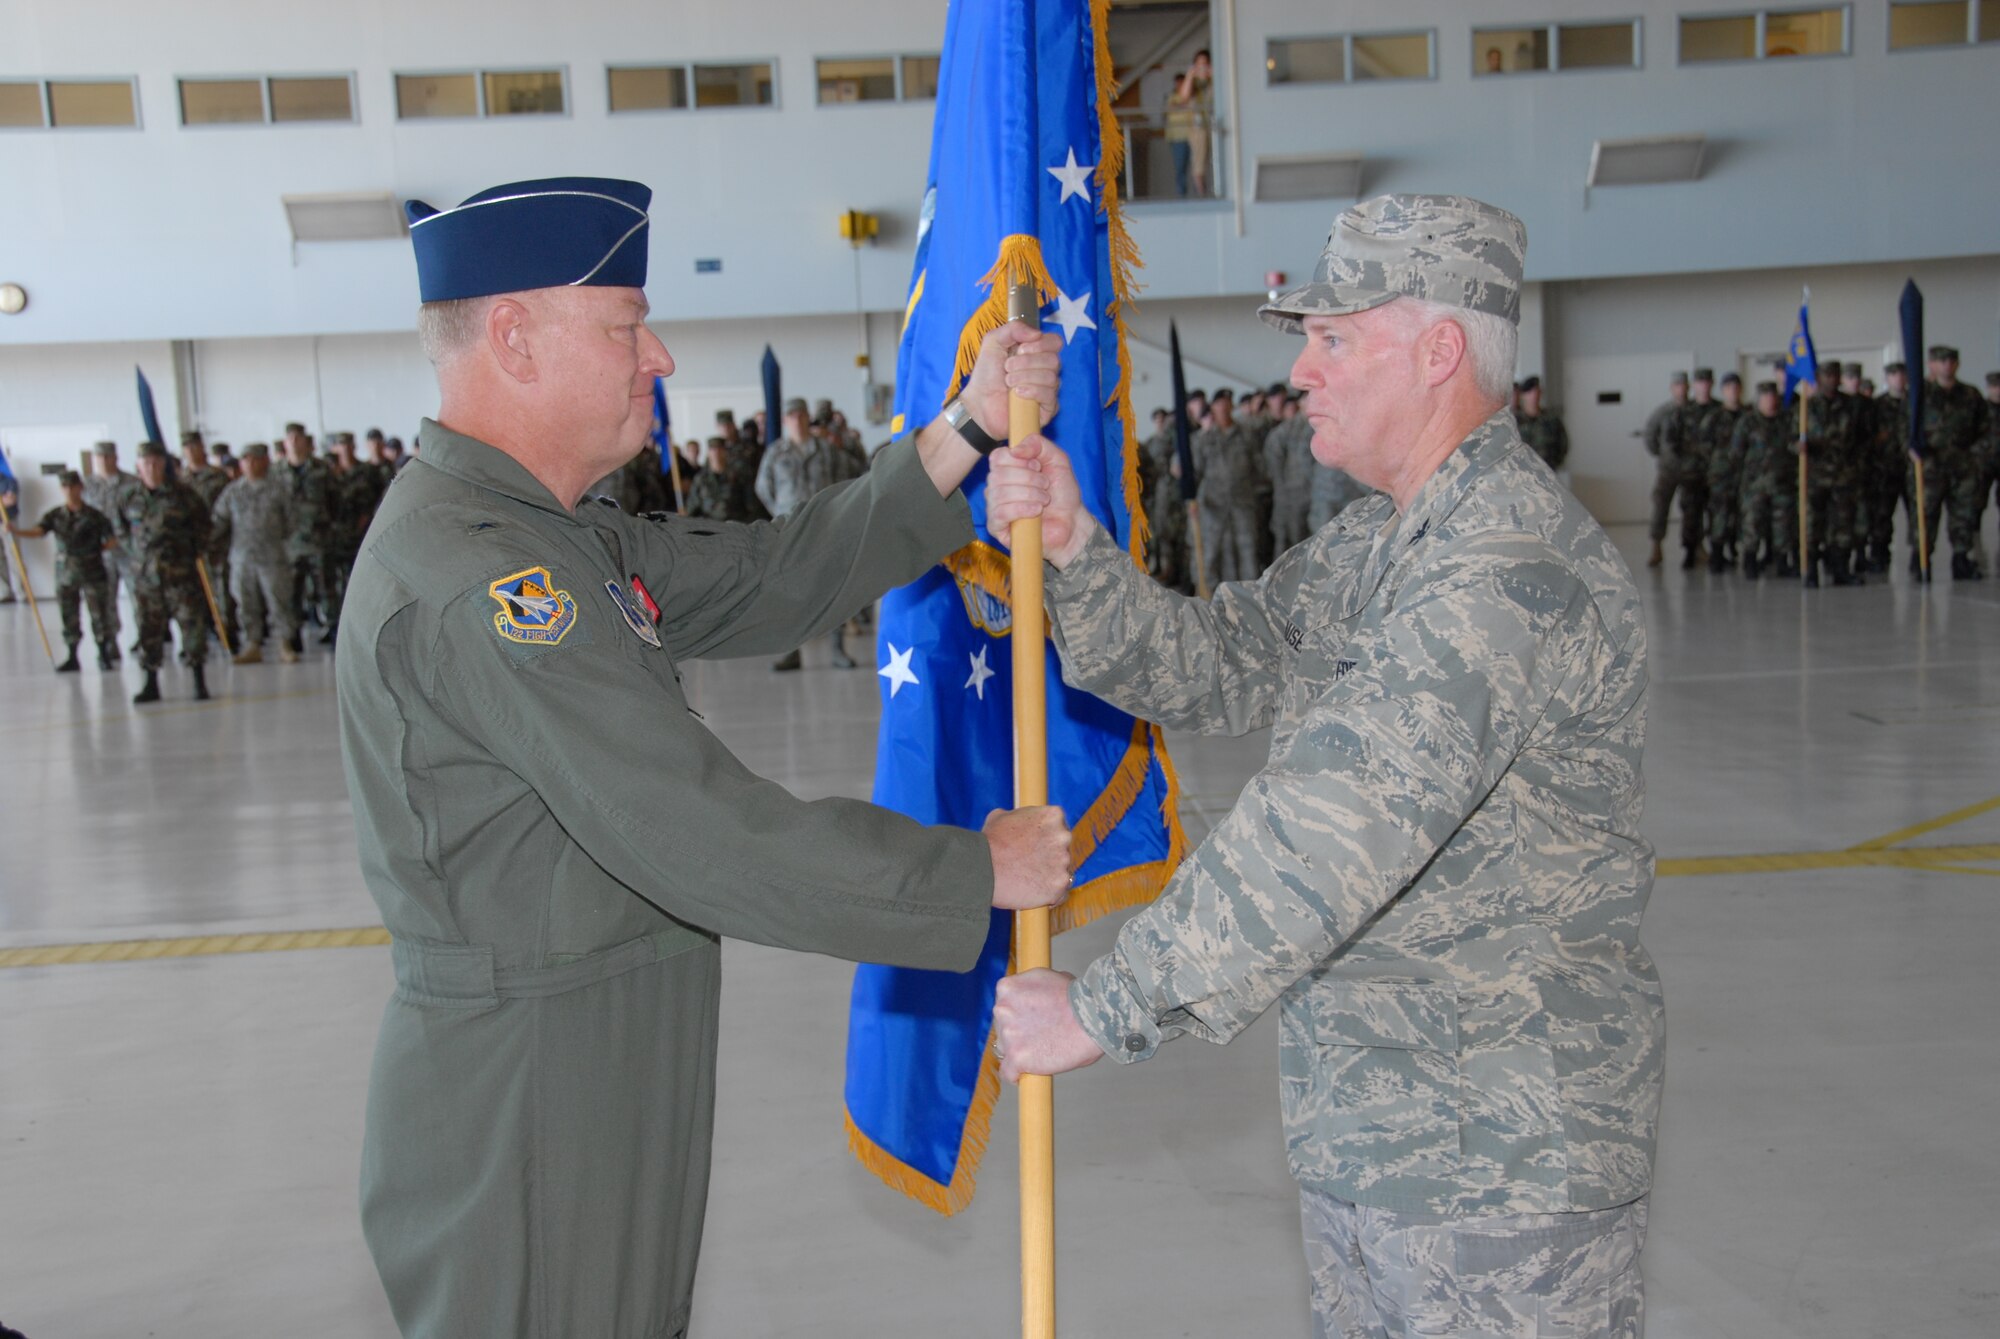 The 181st Fighter Wing, Terre Haute, Ind., conducted a redesignation ceremony on 13 July, 2008 officially marking its transition from flying jets to processing intelligence and providing ground support to air operations at forward locations. Brig. Gen. Richard Clevenger, Indiana Air national Guard Commander, presents Col. Jeffrey Hauser, Wing Commander, new unit flag. U.S. Air force photo by TSgt Michael W. Kellams.